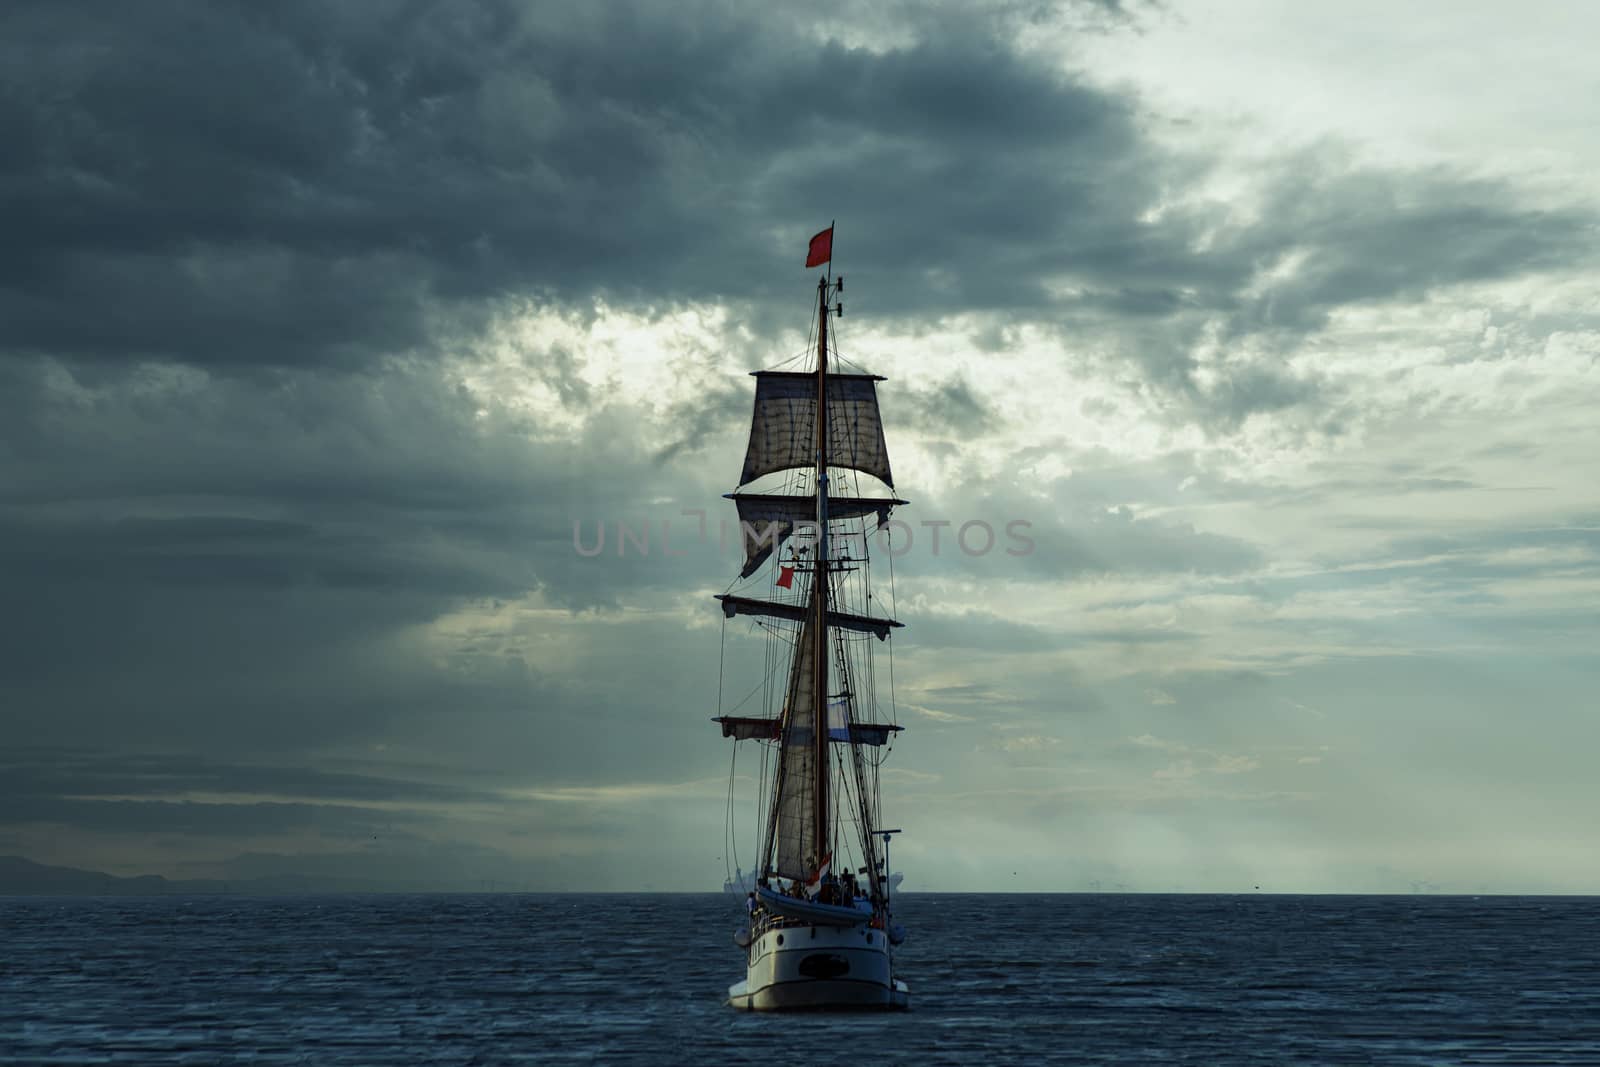 Antique tall ship, vessel leaving the harbor of The Hague, Scheveningen under a warm sunset and golden sky by ankorlight